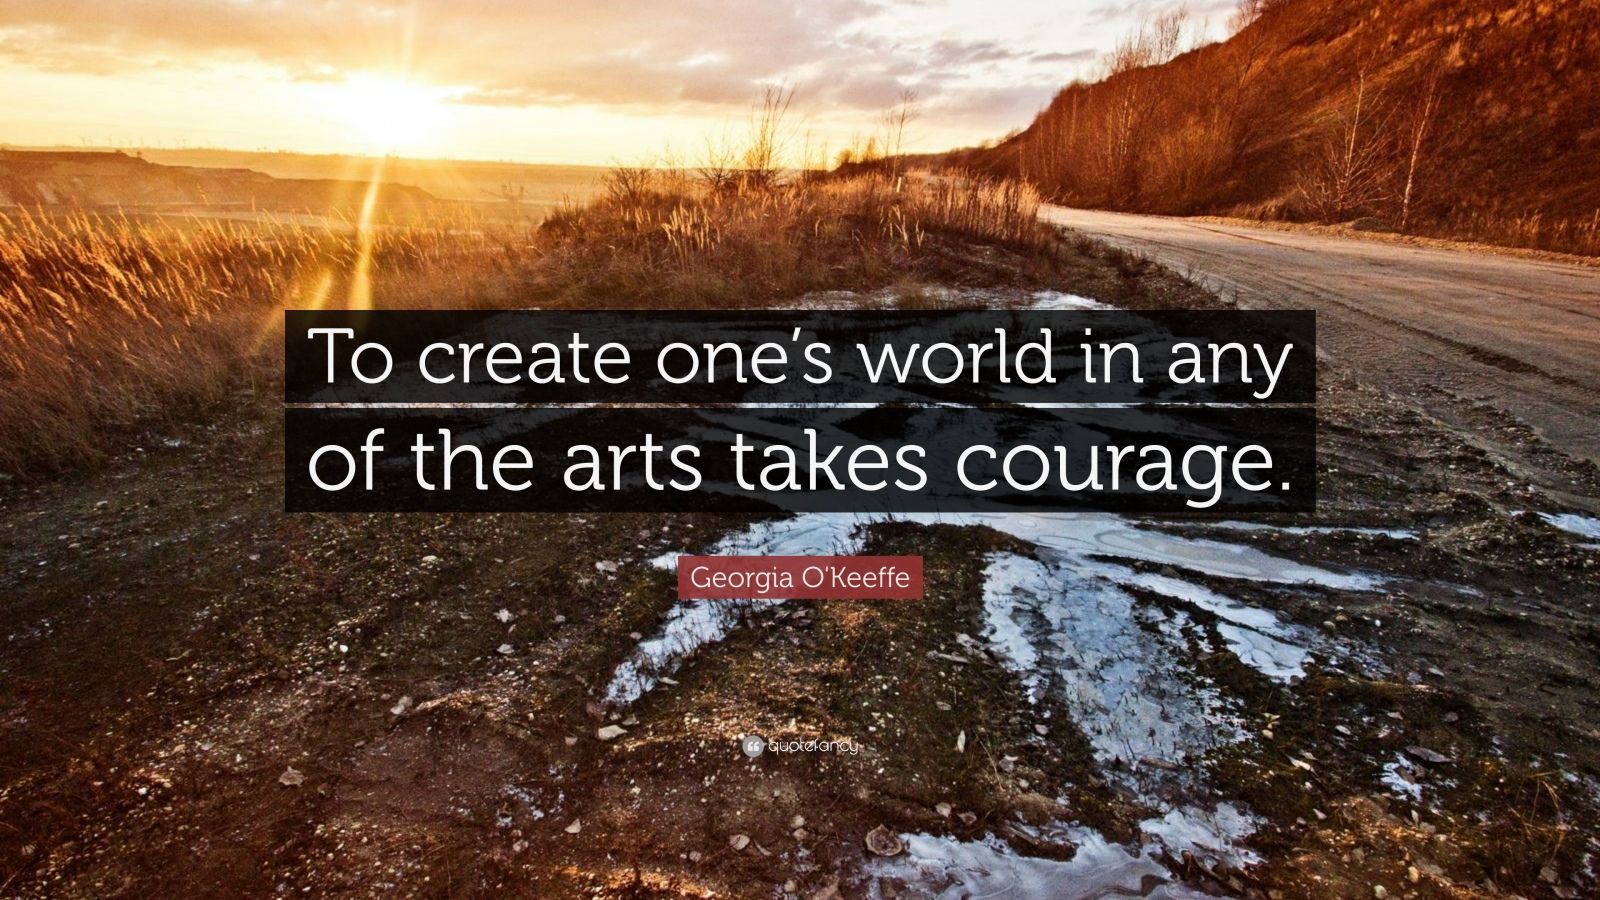 To create one's own world takes courage 🤎